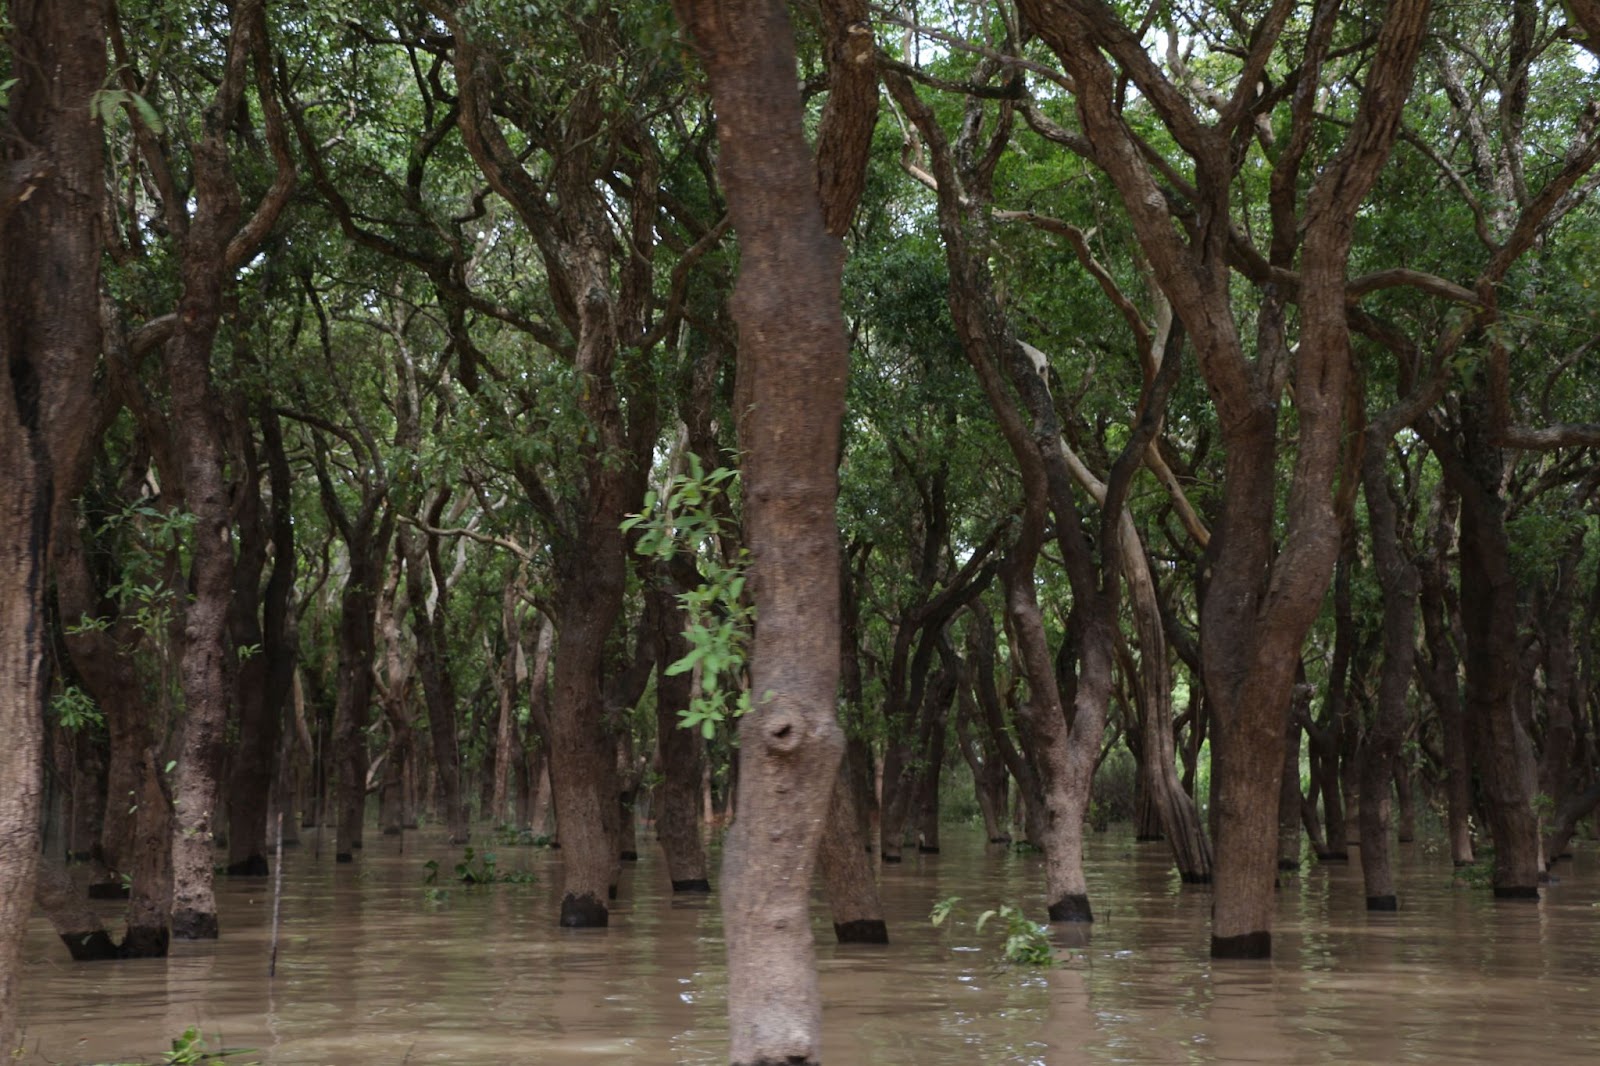 3 days in Siem Reap. This is the flooded forests of Tonle Sap.